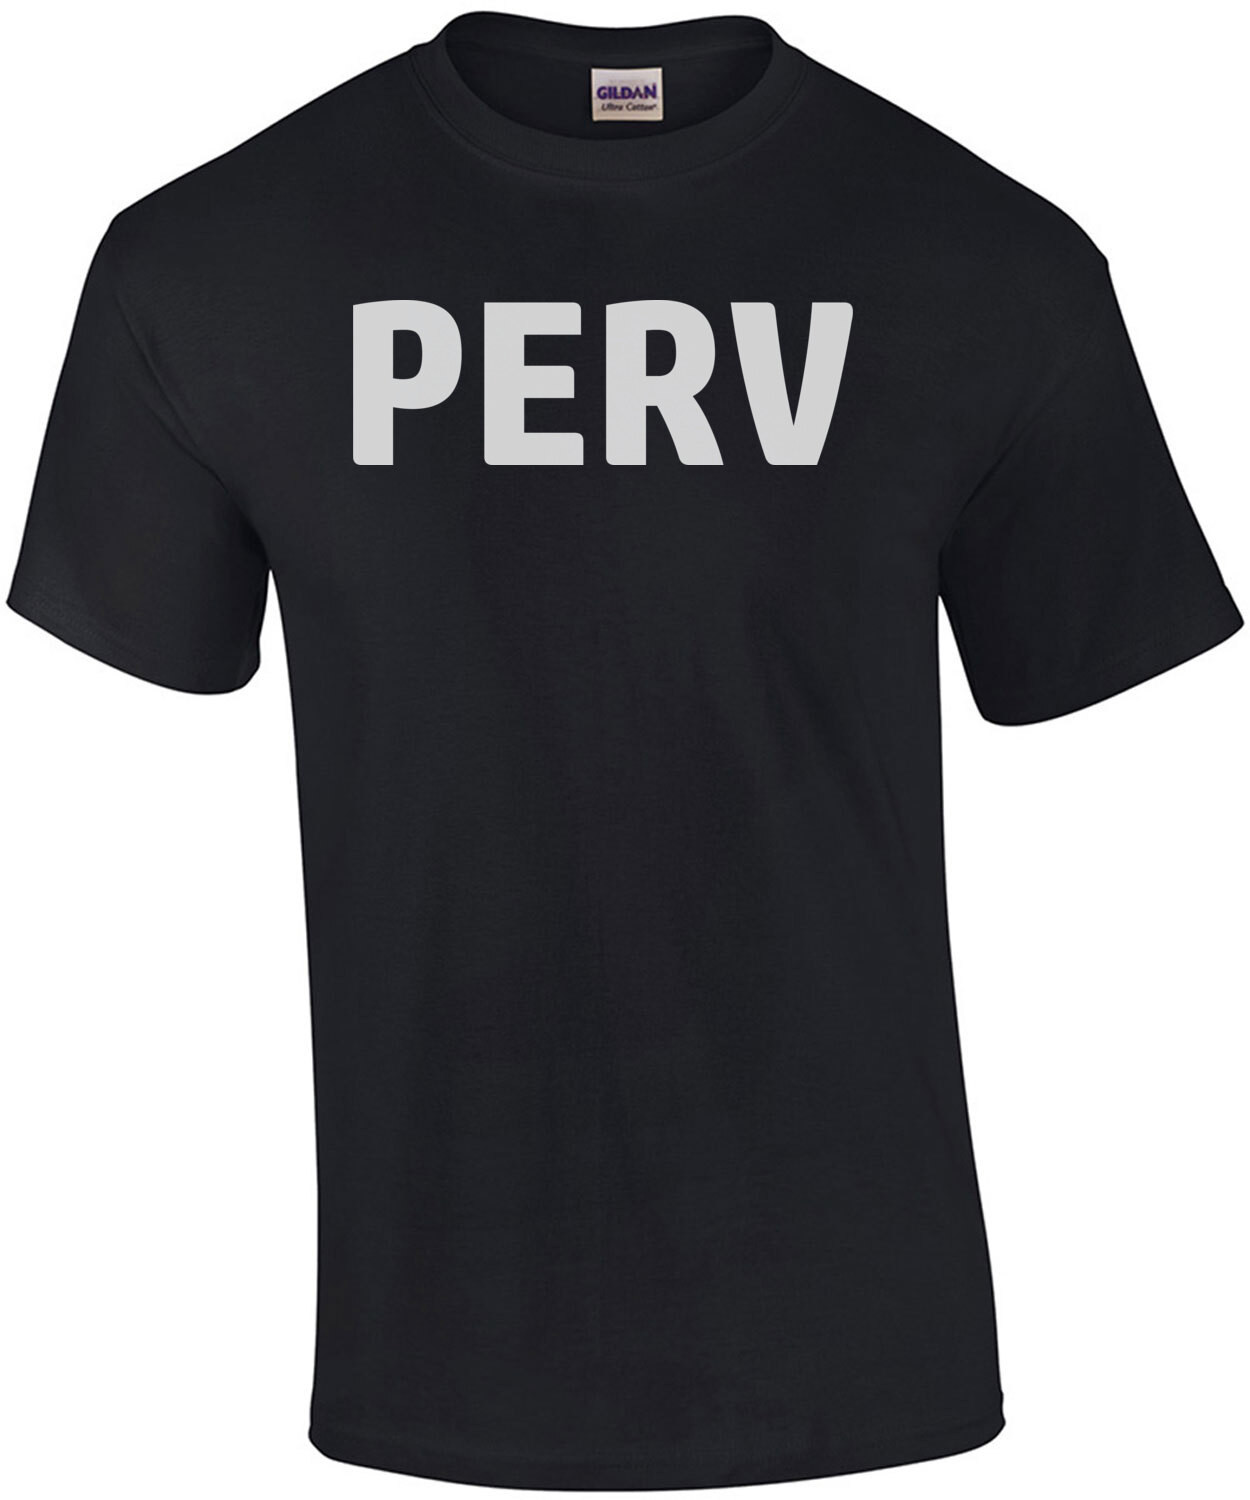 PERV - Perverted - Sexual T-Shirt